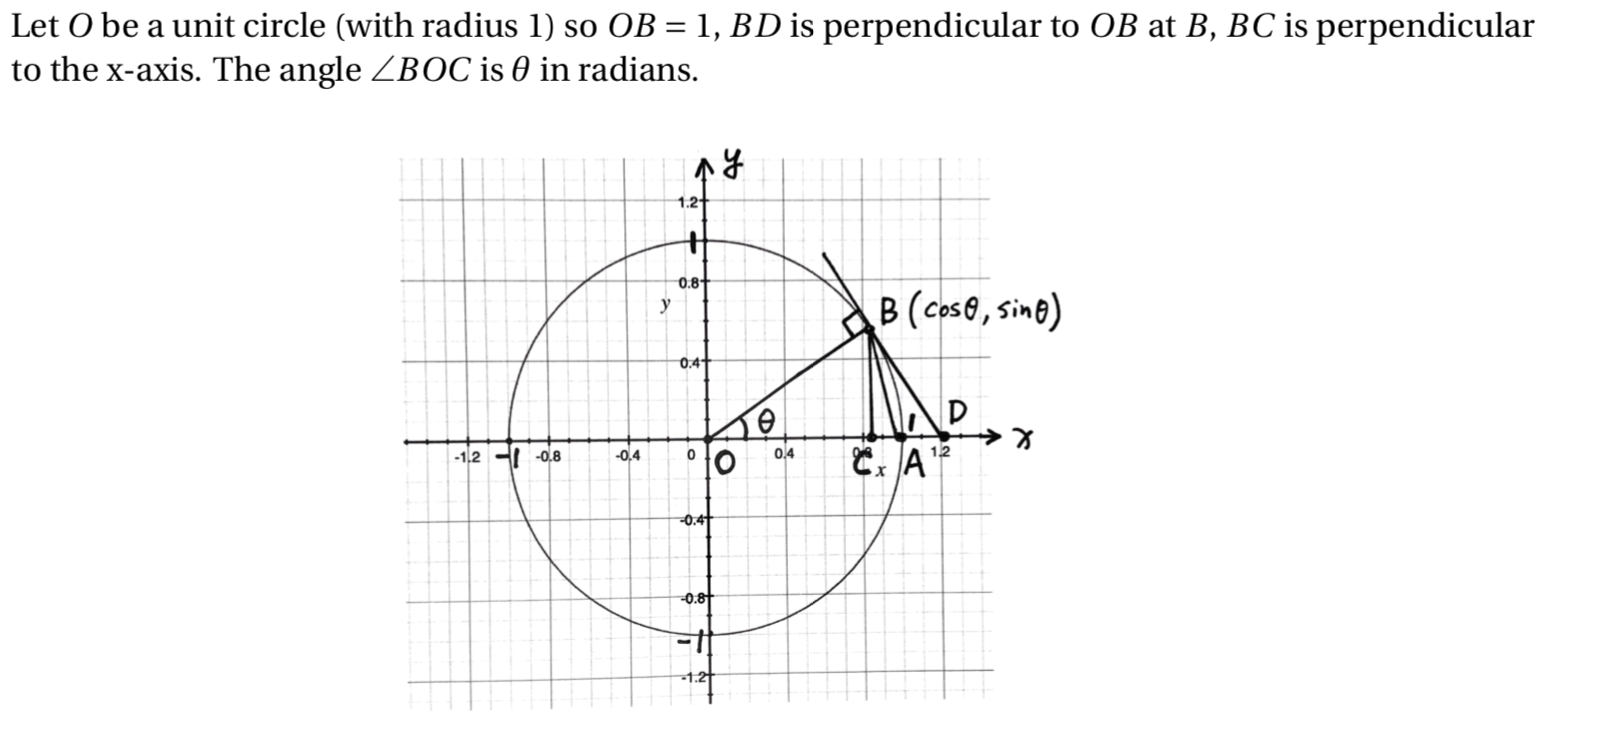 Let O be a unit circle (with radius 1) so OB = 1, BD is perpendicular to OB at B, BC is perpendicular
to the x-axis. The angle ZBOC is 0 in radians.
1.2
0.8
B (cose, Sine)
0.4
1.2
0,4
-1,2 -I -0,8
-0.4
-0.4
-0.8
-1.2
